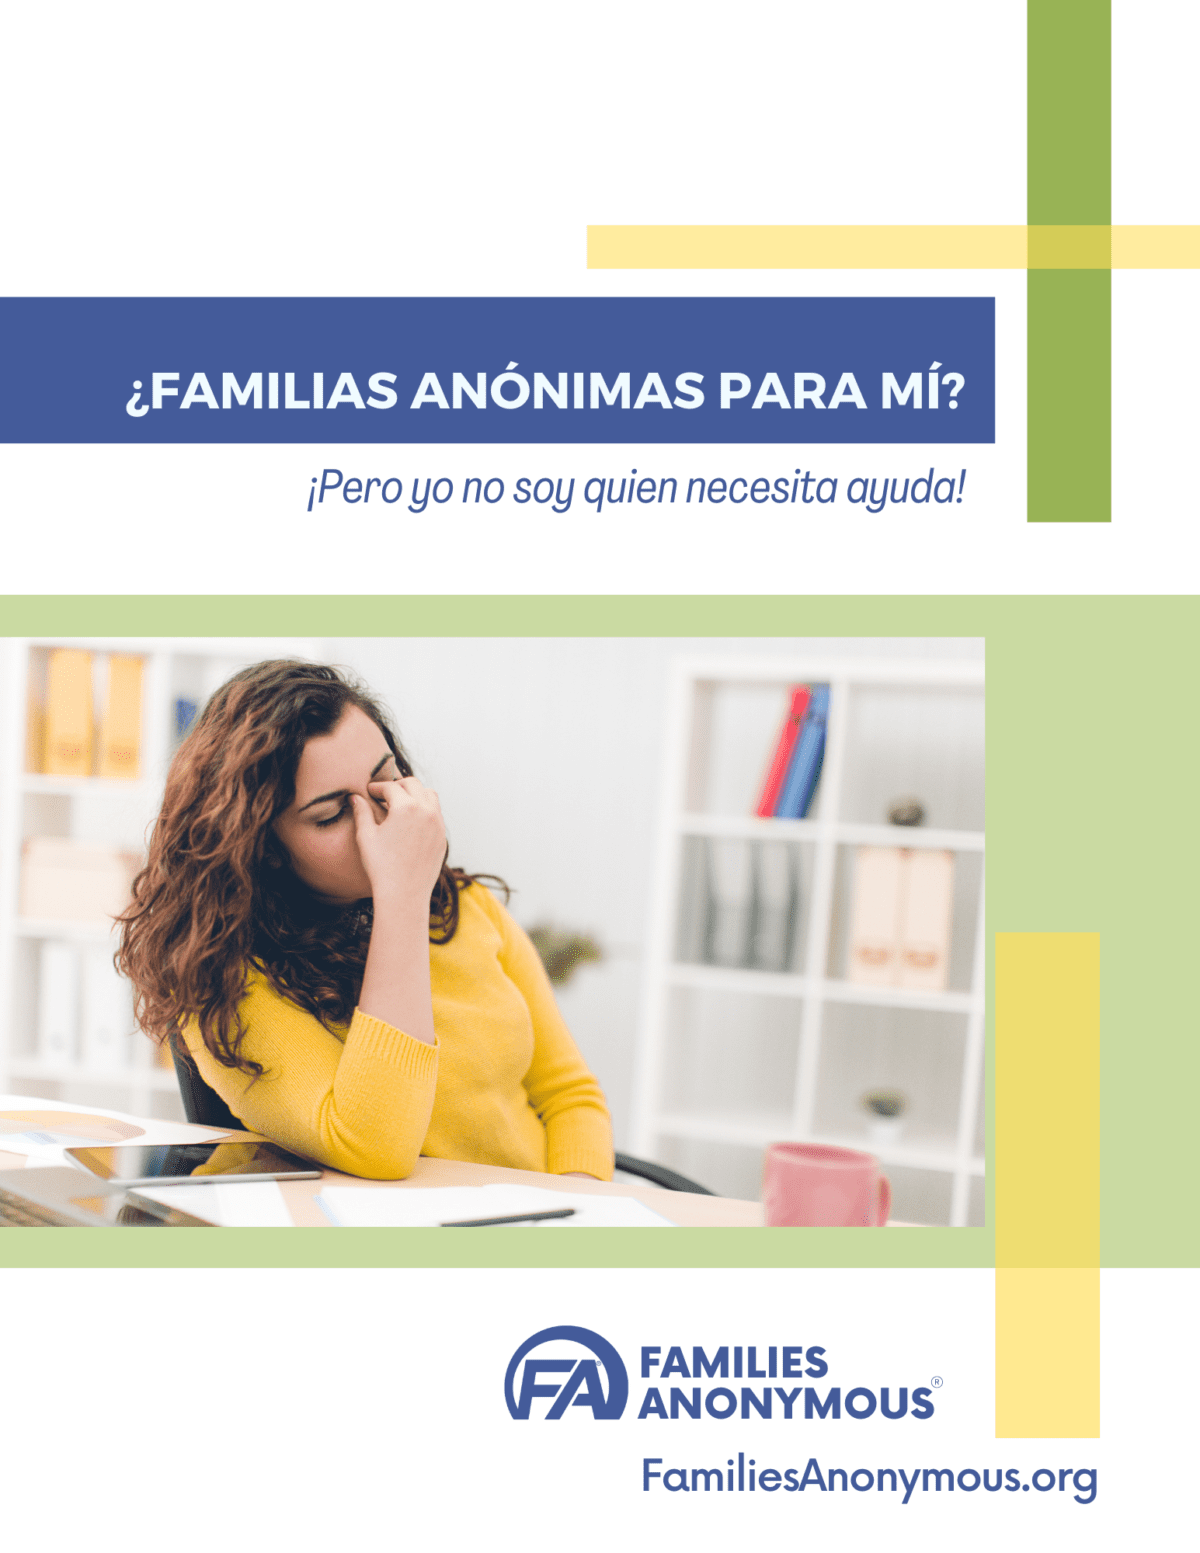 Families Anonymous For Me? – SPANISH